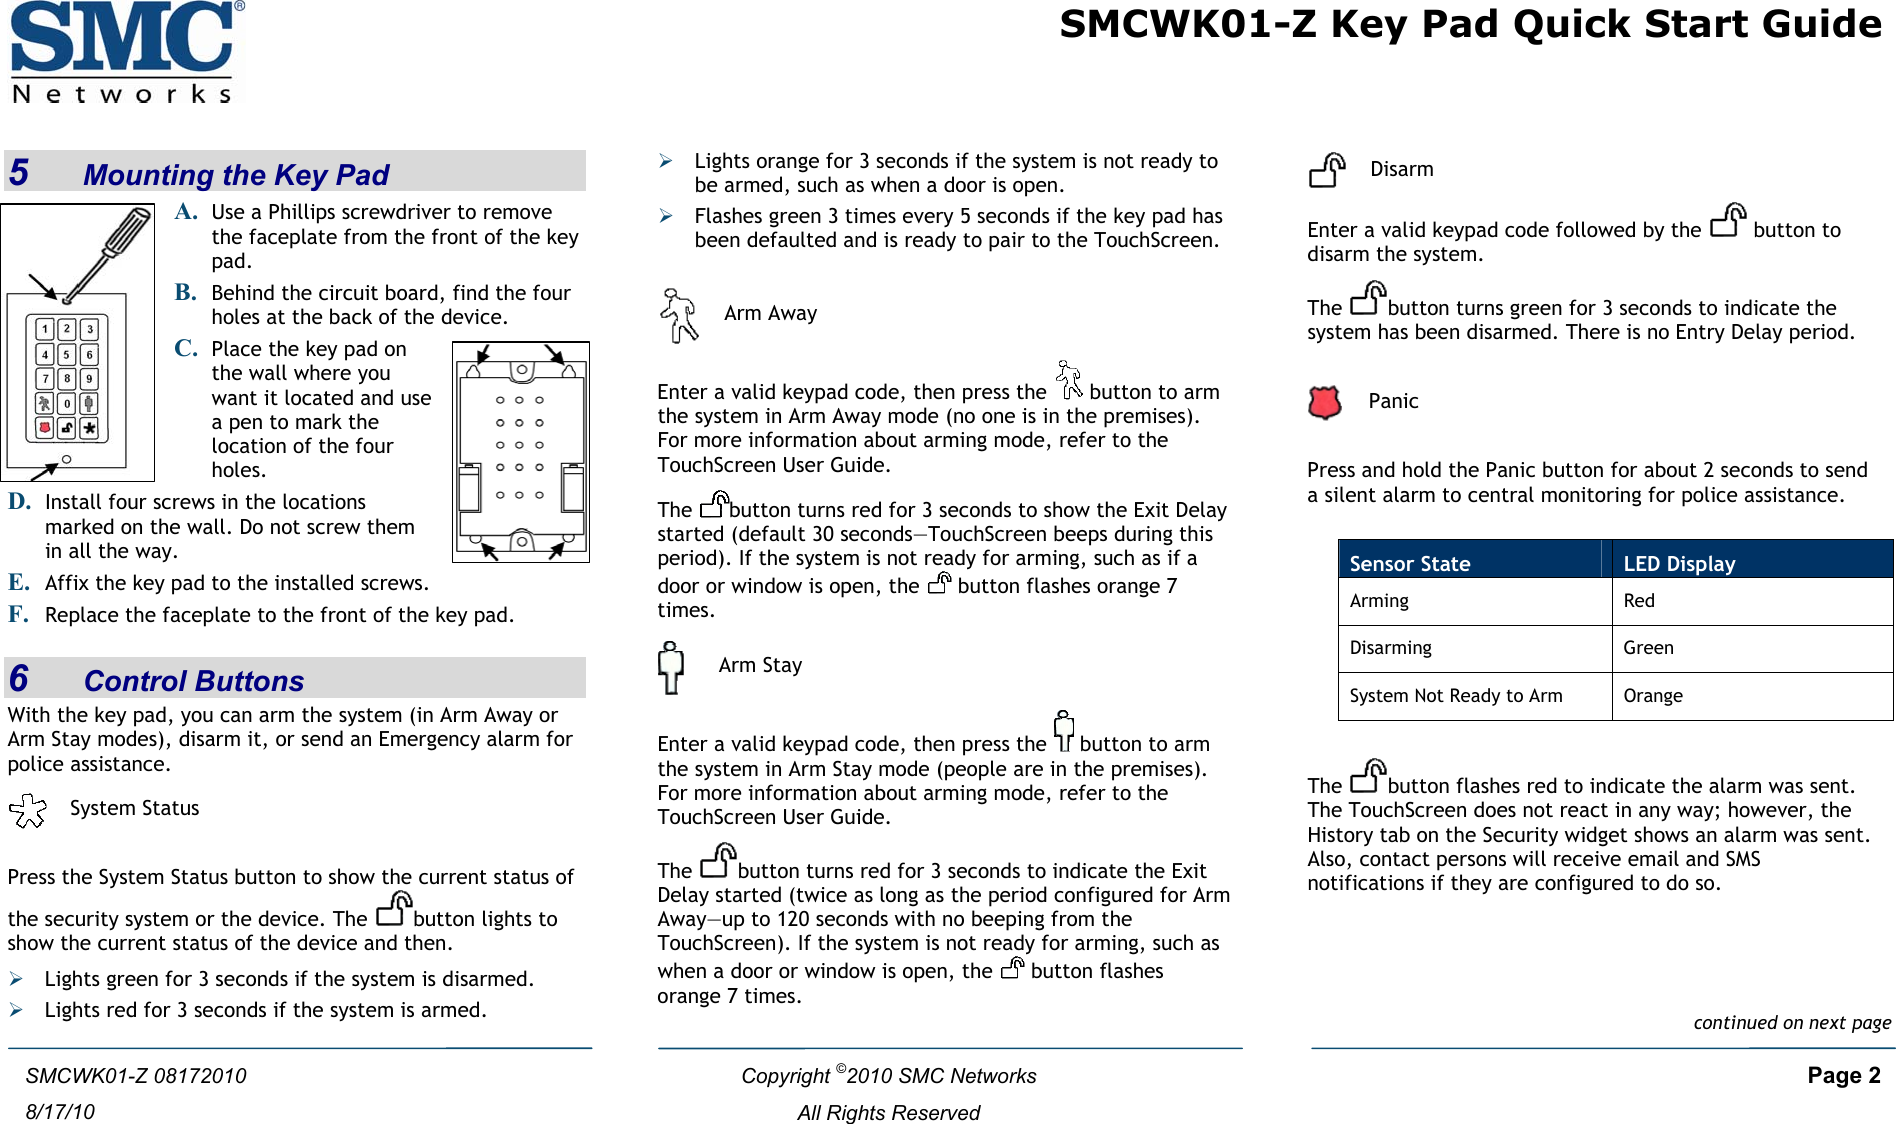  SMCWK01-Z Key Pad Quick Start Guide  Copyright ©2010 SMC Networks     Page 2  All Rights Reserved SMCWK01-Z 08172010 8/17/10 5    Mounting the Key Pad A. Use a Phillips screwdriver to remove the faceplate from the front of the key pad.  B. Behind the circuit board, find the four holes at the back of the device.  C. Place the key pad on the wall where you want it located and use a pen to mark the location of the four holes. D. E. Affix the key pad to the installed screws. Install four screws in the locations marked on the wall. Do not screw them in all the way. F. Replace the faceplate to the front of the key pad.  6    Control Buttons With the key pad, you can arm the system (in Arm Away or Arm Stay modes), disarm it, or send an Emergency alarm for police assistance.   System Status  Press the System Status button to show the current status of the security system or the device. The  button lights to show the current status of the device and then. ¾ Lights green for 3 seconds if the system is disarmed. ¾ Lights red for 3 seconds if the system is armed. ¾ Lights orange for 3 seconds if the system is not ready to be armed, such as when a door is open. ¾ Flashes green 3 times every 5 seconds if the key pad has been defaulted and is ready to pair to the TouchScreen.   Arm Away Enter a valid keypad code, then press the   button to arm the system in Arm Away mode (no one is in the premises). For more information about arming mode, refer to the TouchScreen User Guide. The  button turns red for 3 seconds to show the Exit Delay started (default 30 seconds—TouchScreen beeps during this period). If the system is not ready for arming, such as if a door or window is open, the   button flashes orange 7 times.  Arm Stay Enter a valid keypad code, then press the   button to arm the system in Arm Stay mode (people are in the premises). For more information about arming mode, refer to the TouchScreen User Guide. The  button turns red for 3 seconds to indicate the Exit Delay started (twice as long as the period configured for Arm Away—up to 120 seconds with no beeping from the TouchScreen). If the system is not ready for arming, such as when a door or window is open, the   button flashes orange 7 times.   Disarm Enter a valid keypad code followed by the   button to disarm the system.  The  button turns green for 3 seconds to indicate the system has been disarmed. There is no Entry Delay period.    Panic  Press and hold the Panic button for about 2 seconds to send a silent alarm to central monitoring for police assistance.   The  button flashes red to indicate the alarm was sent. The TouchScreen does not react in any way; however, the History tab on the Security widget shows an alarm was sent. Also, contact persons will receive email and SMS notifications if they are configured to do so.   Sensor State  LED Display Arming Red Disarming Green System Not Ready to Arm  Orange continued on next page